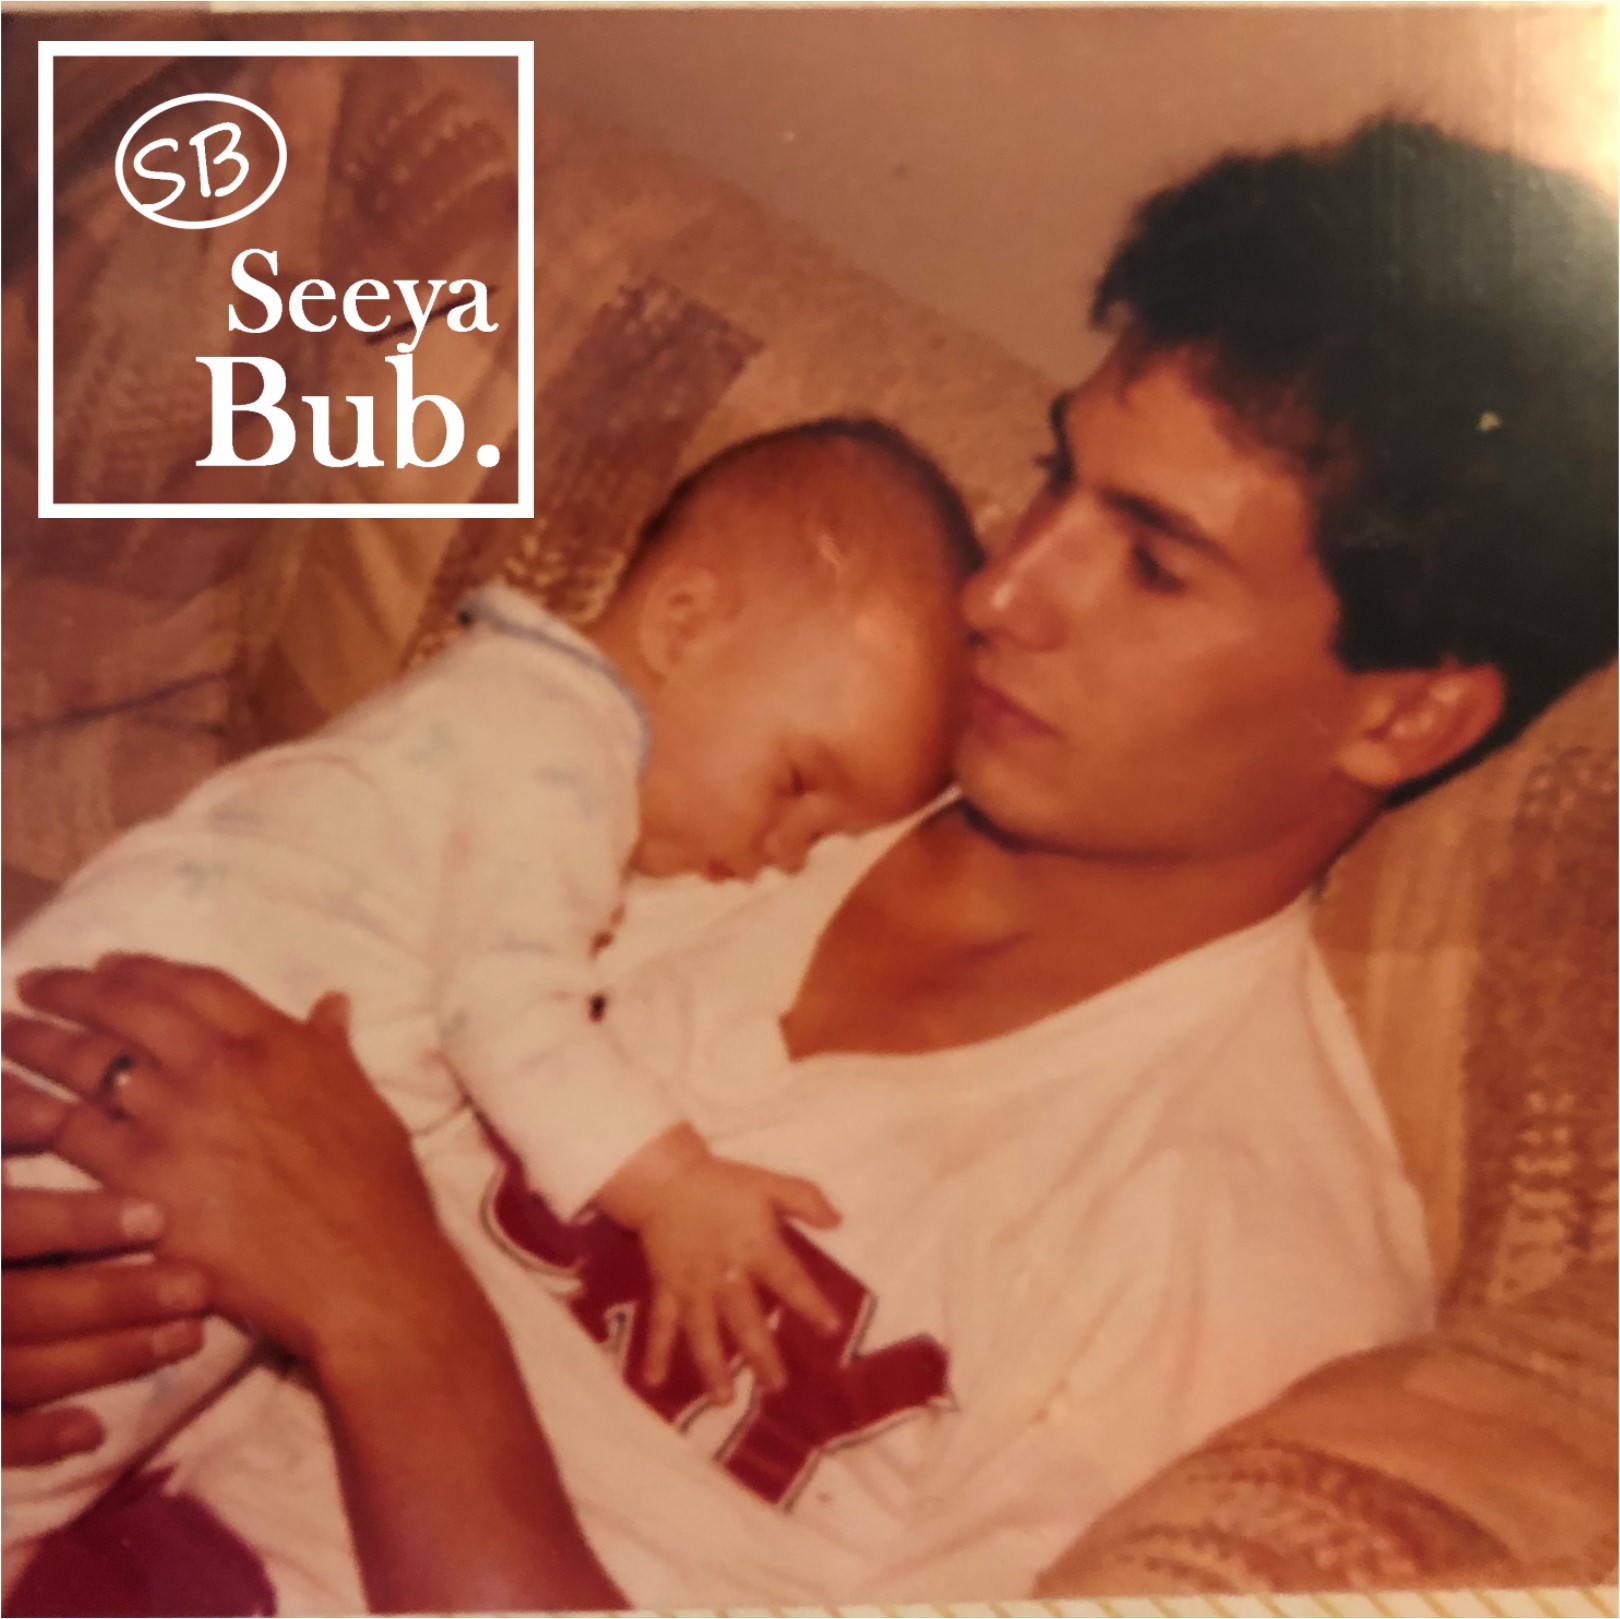 Dad Holding Me as a Baby with SB Logo